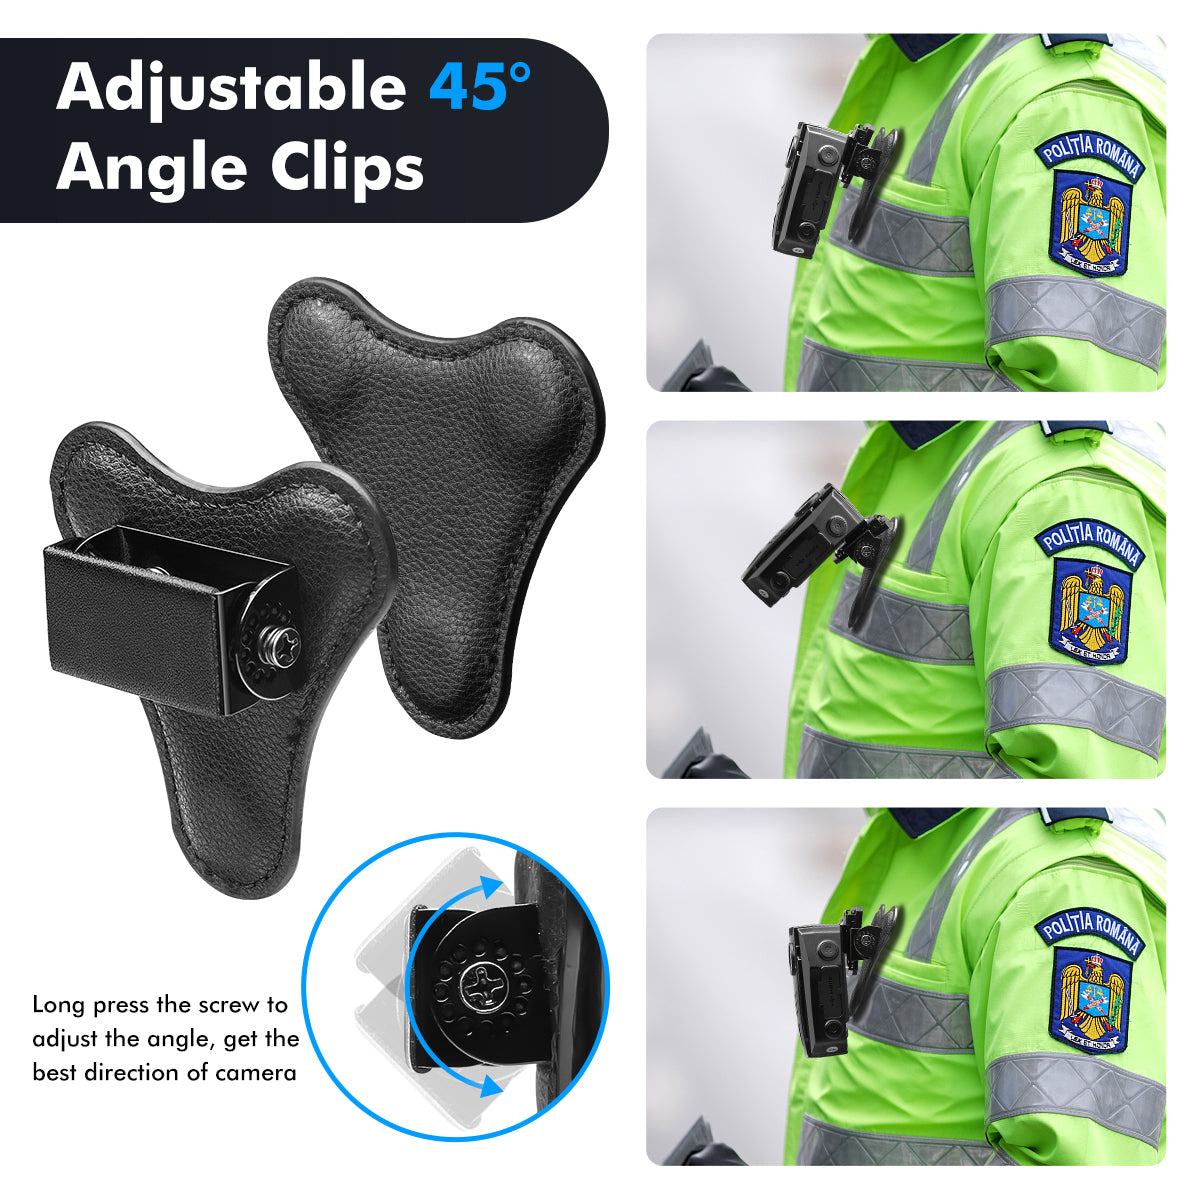 How to buy a body cam: all you need to know to find the best body